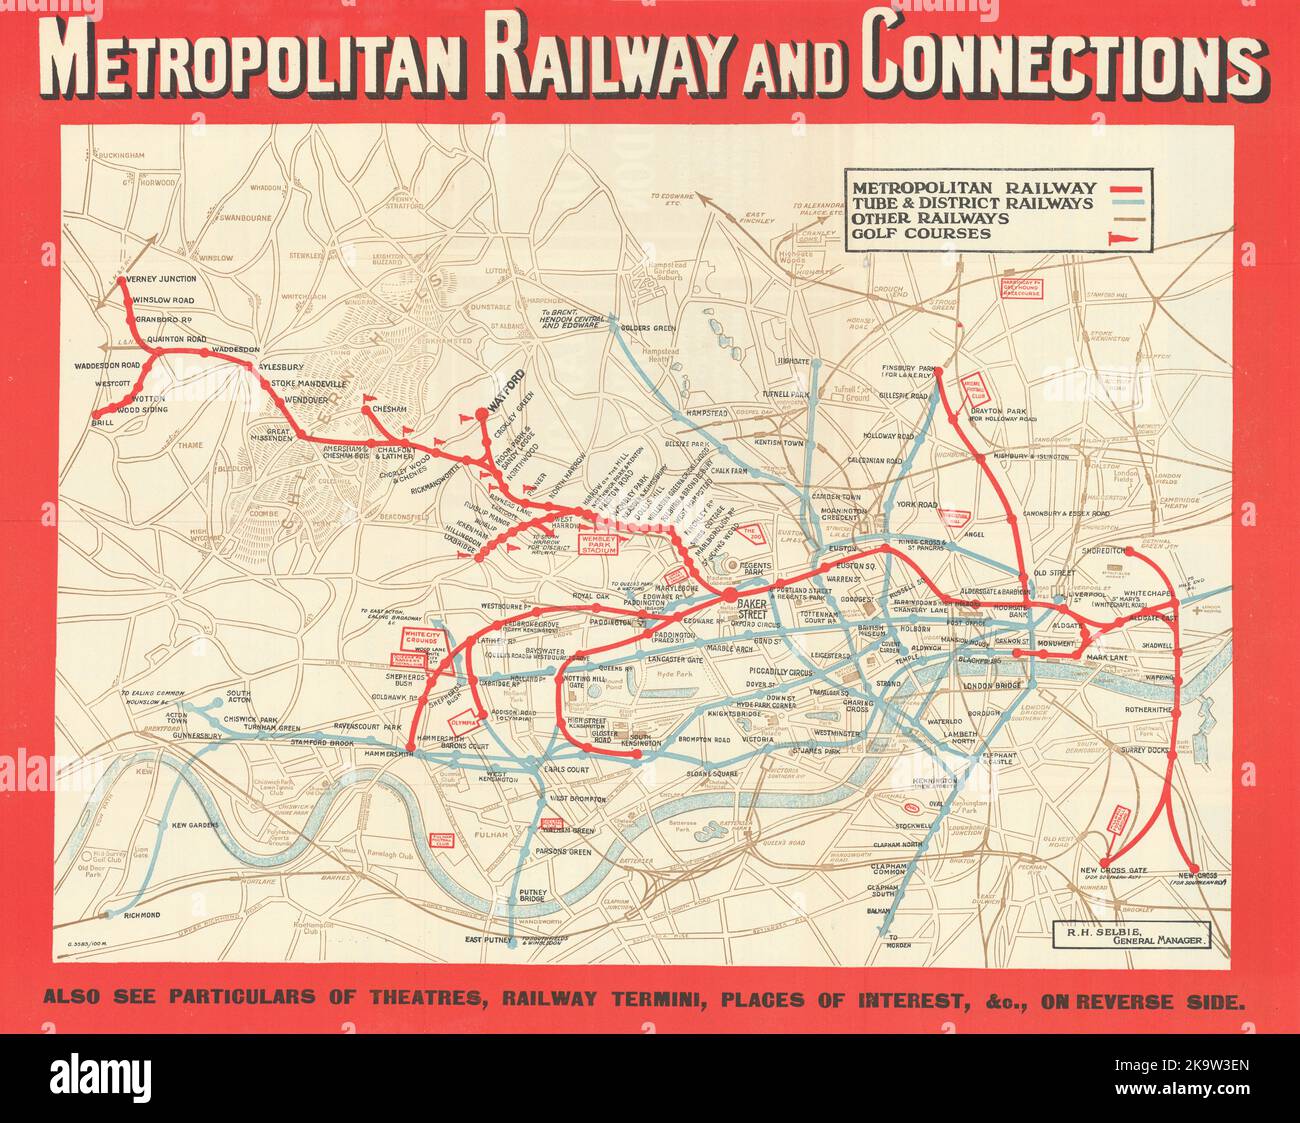 Metropolitan Railway and Connections. London Underground. SELBIE c1930 old map Stock Photo